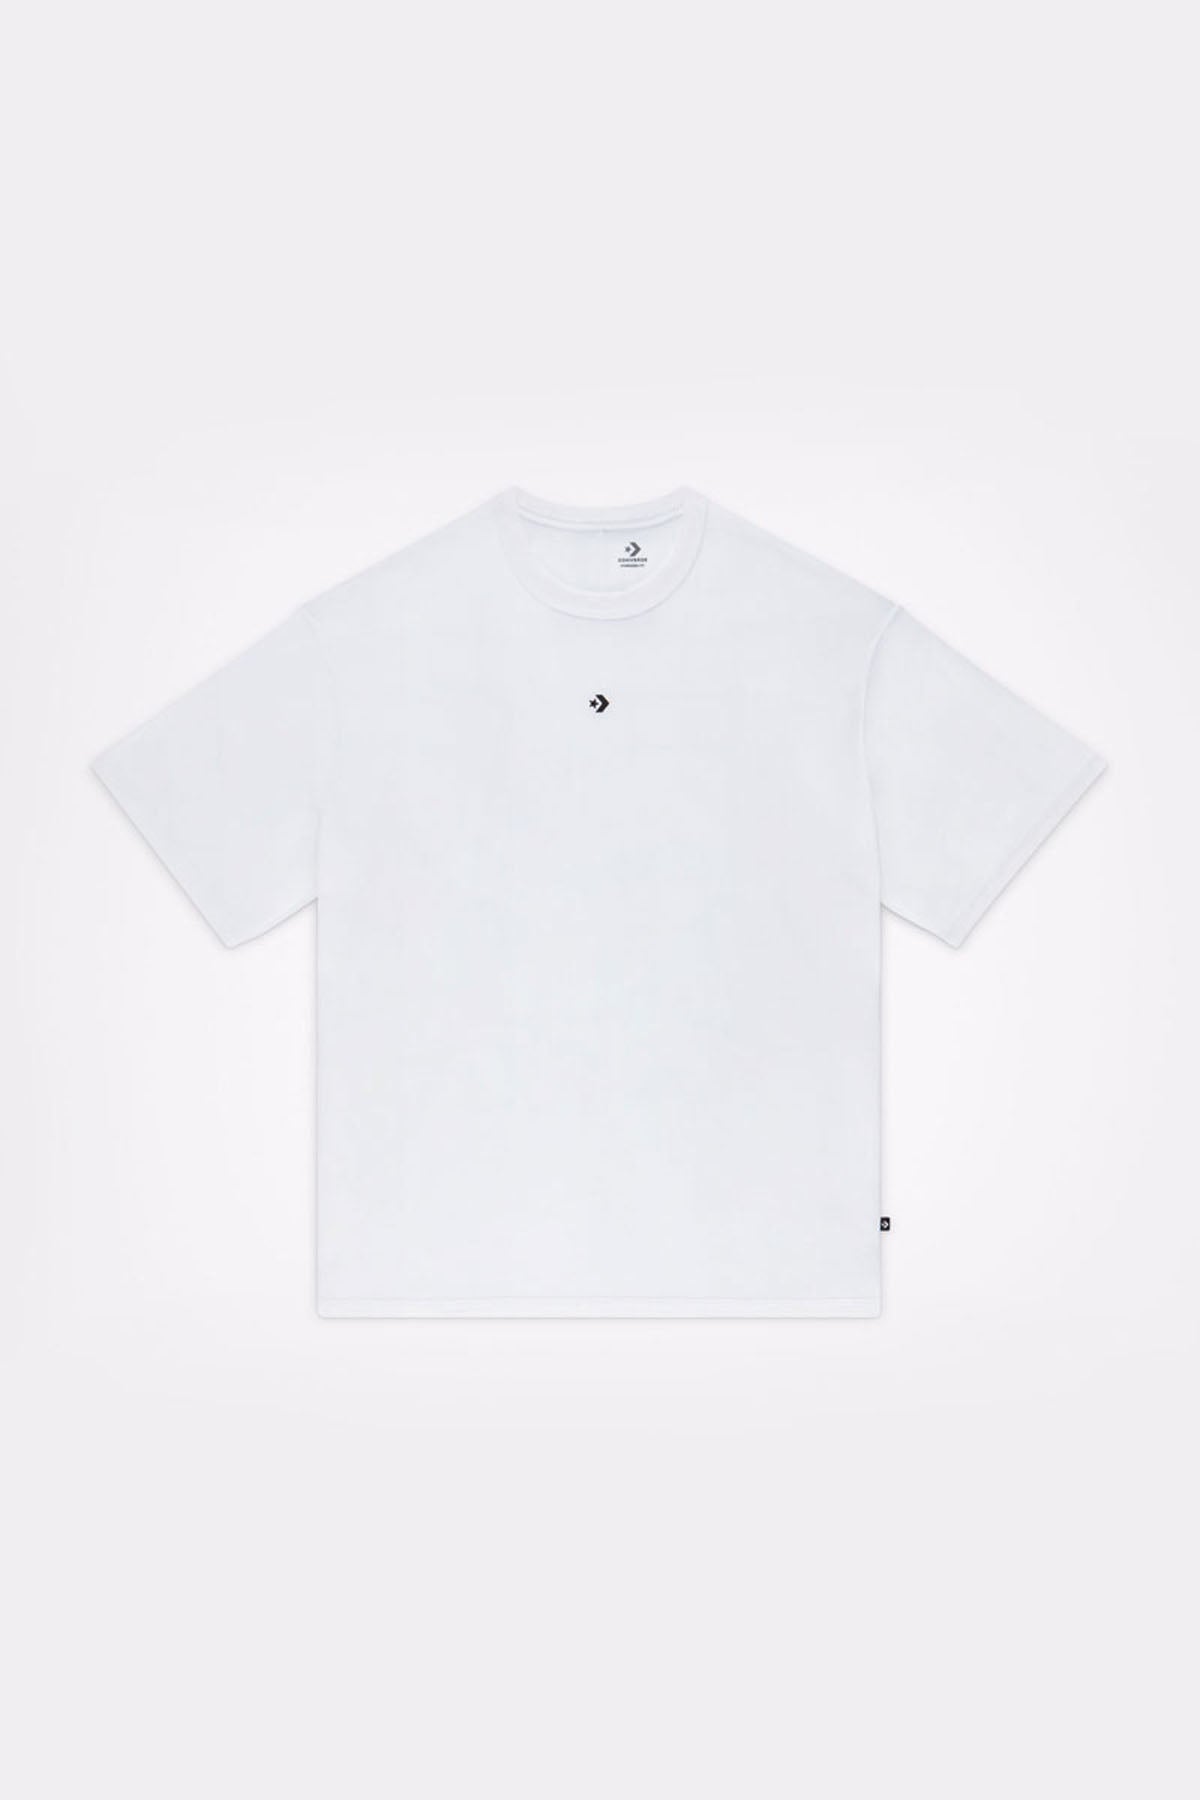 CROSSOVER TEE - WHITE